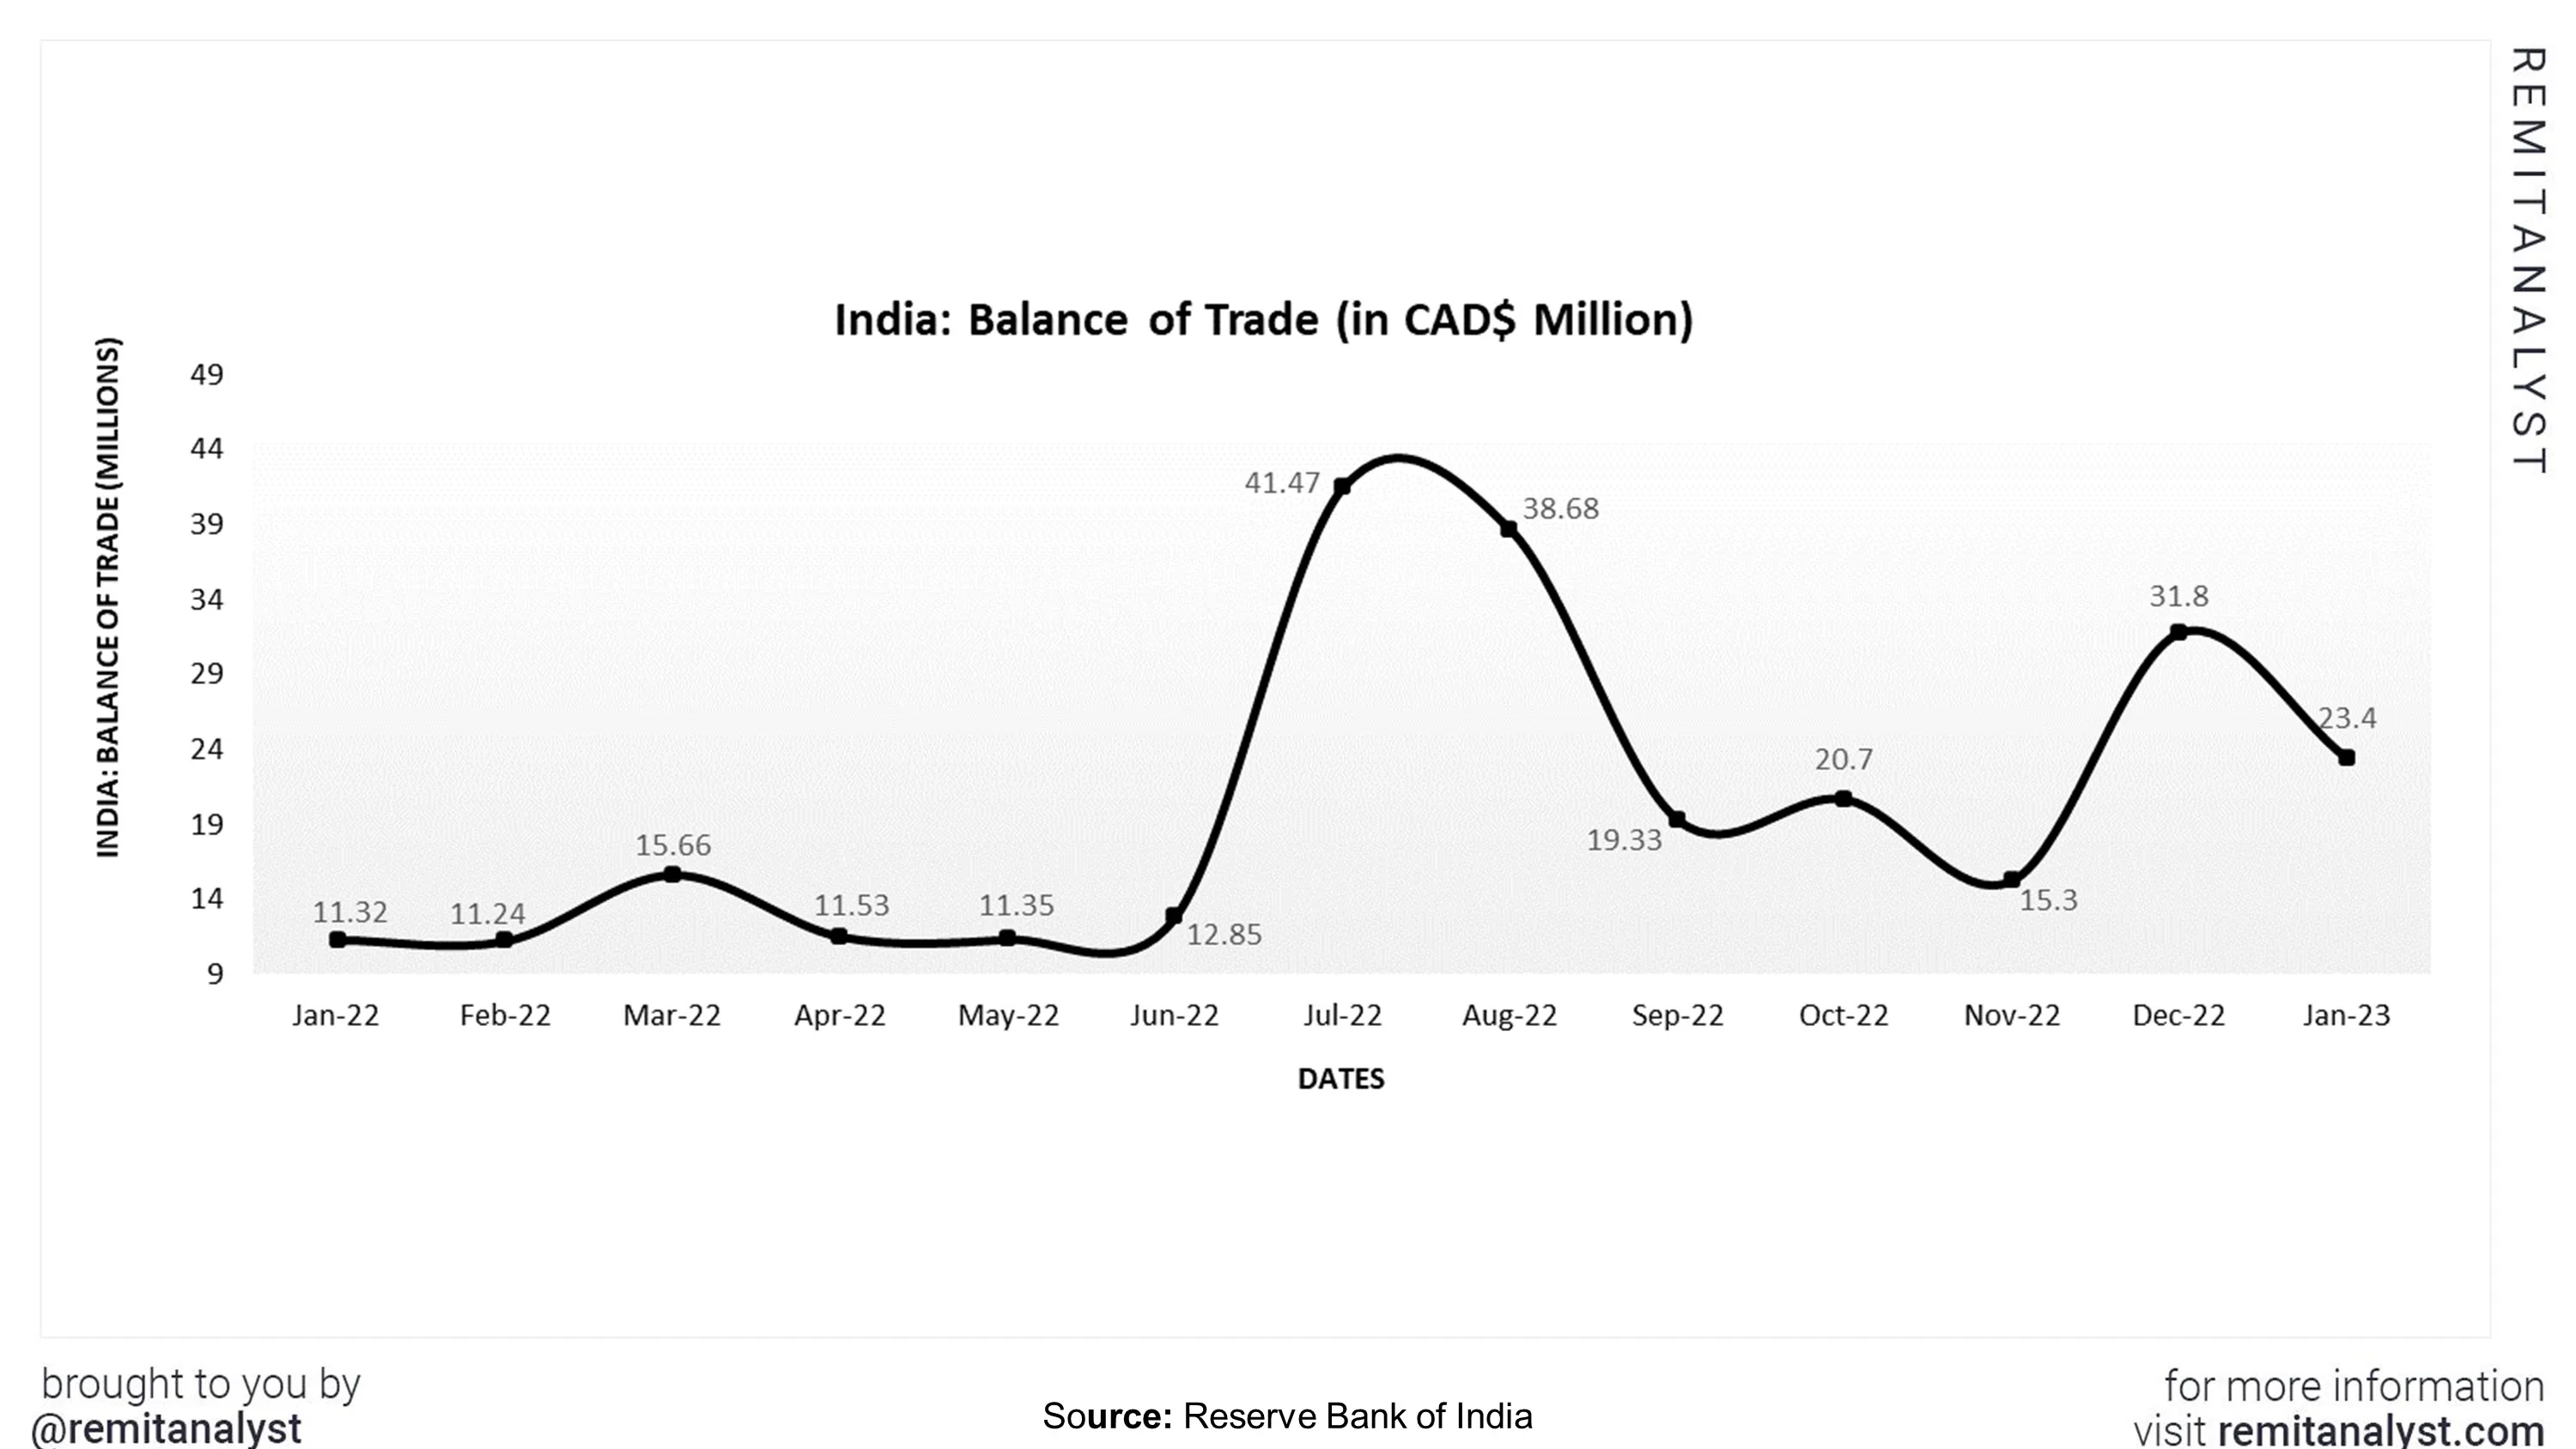 balance-of-trade-india-sep-from-jan-2022-to-jan-2022